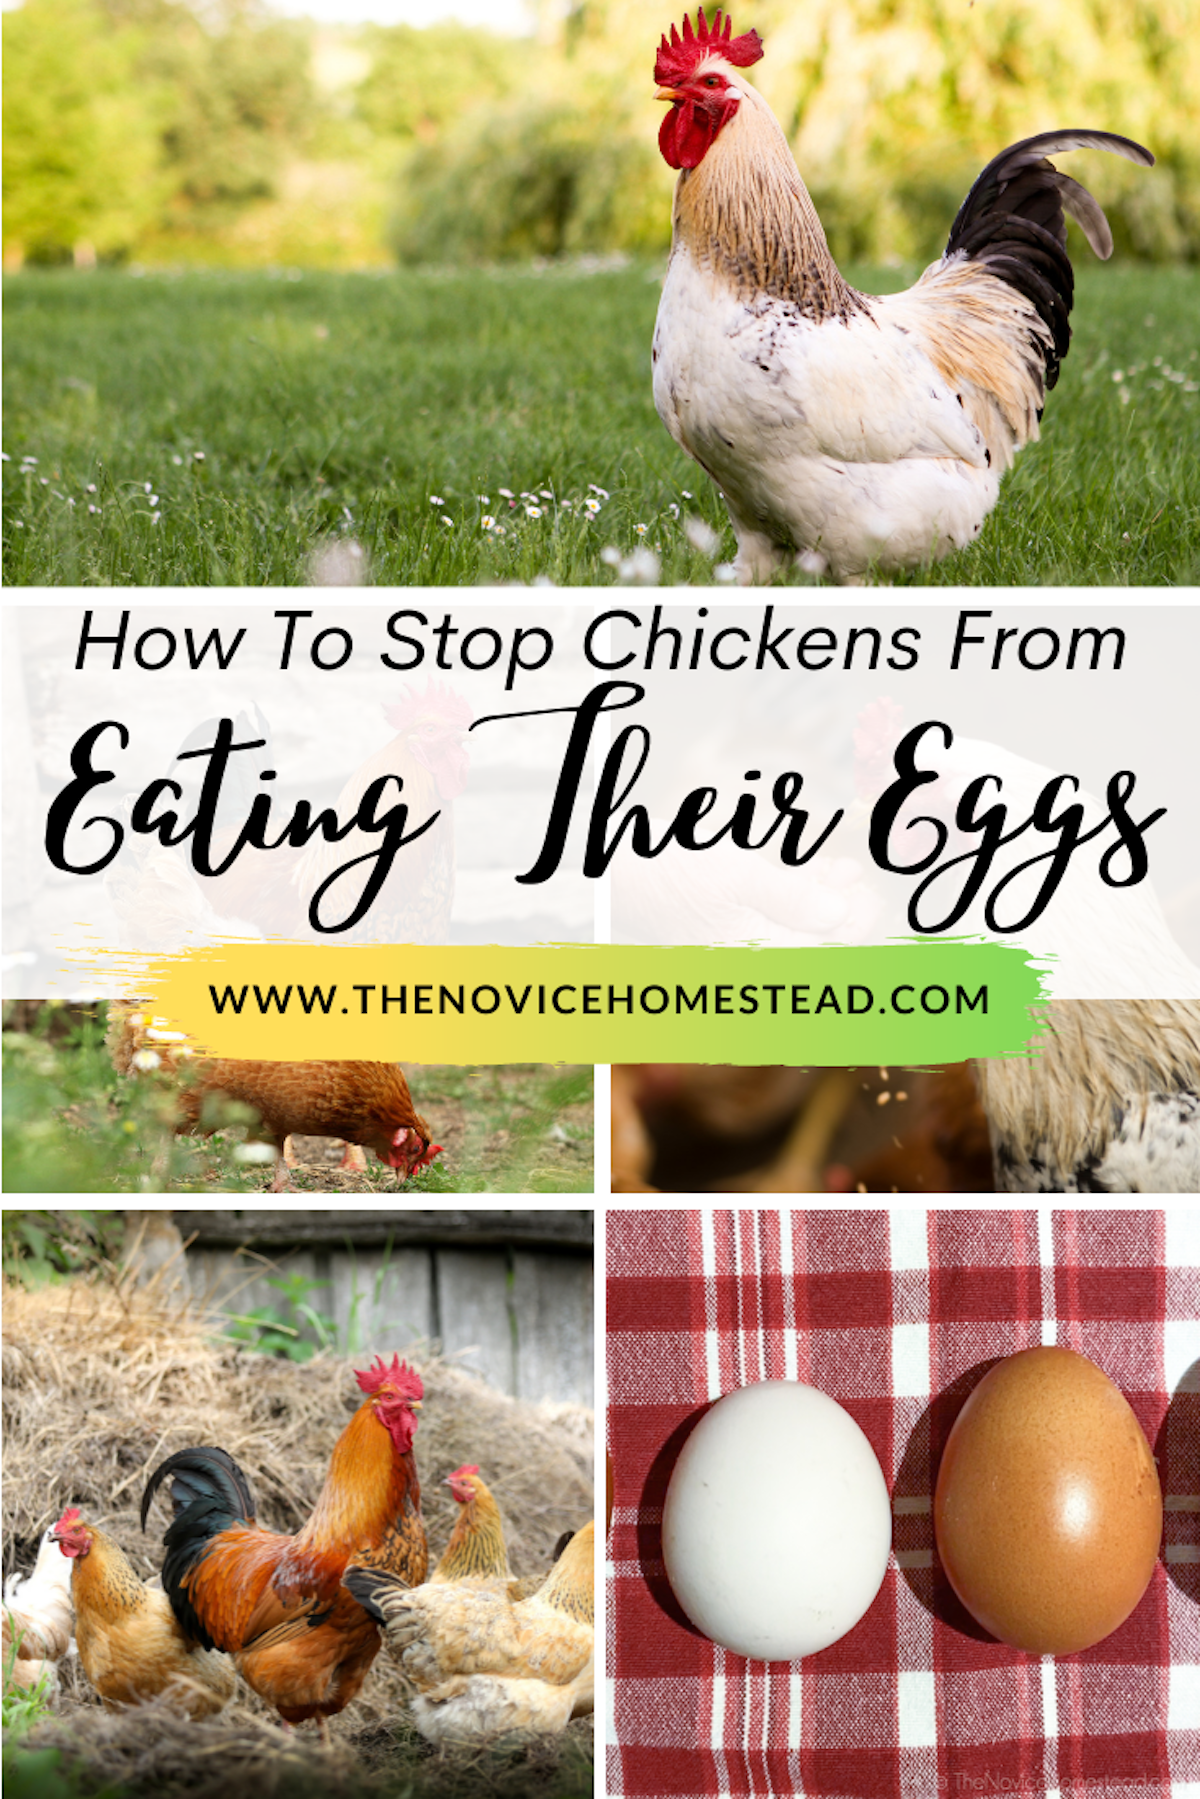 collage of chicken photos; text overlay "How to Stop Chickens From Eating Their Eggs"